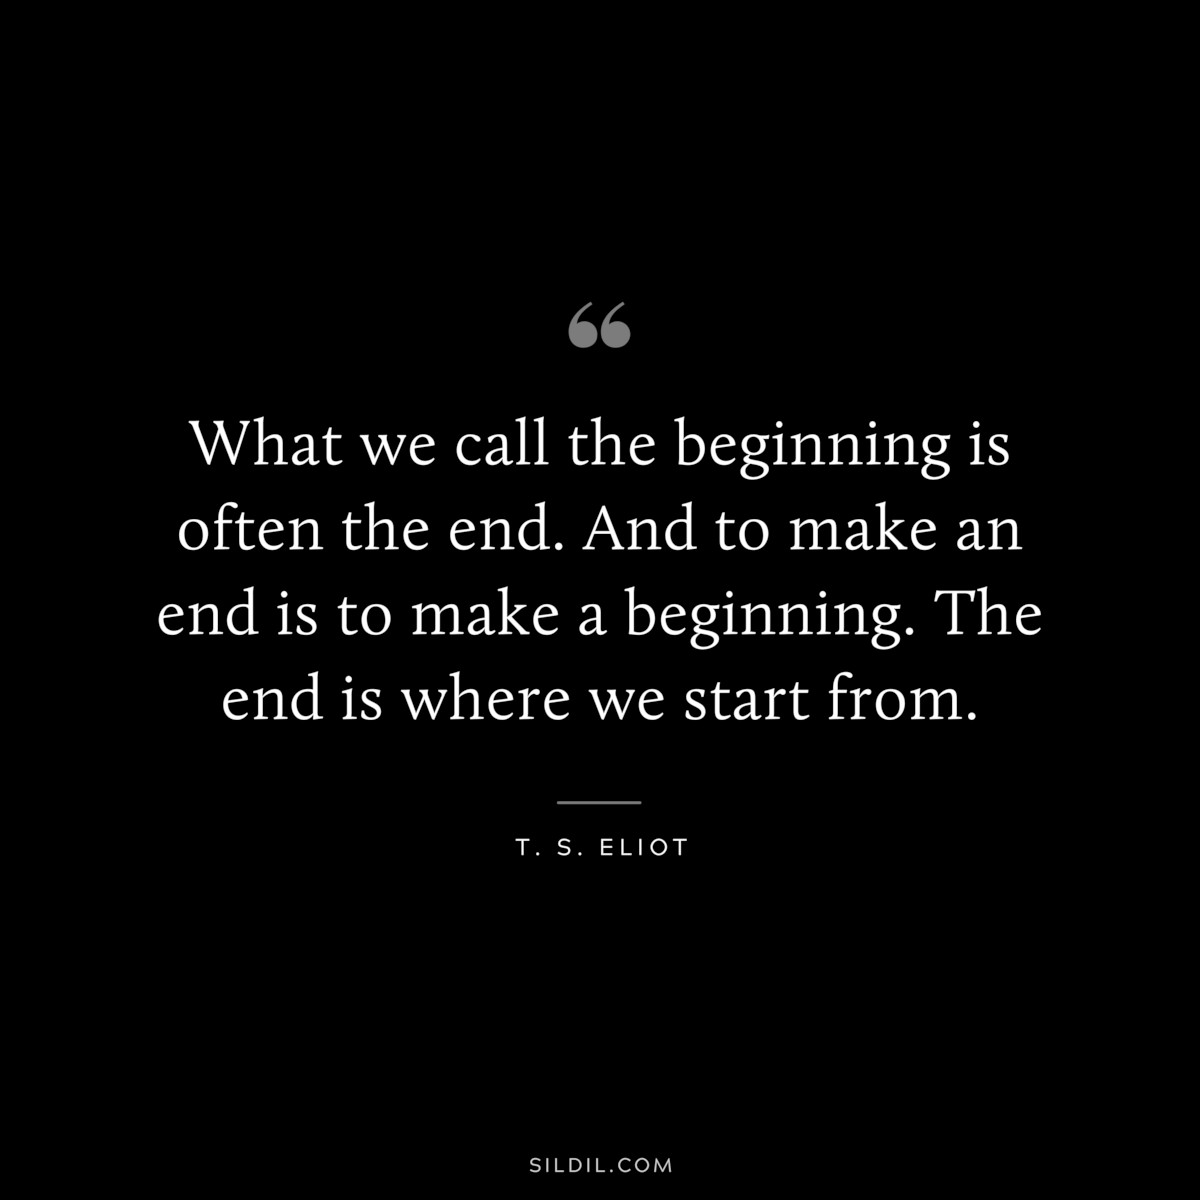 What we call the beginning is often the end. And to make an end is to make a beginning. The end is where we start from. ― T. S. Eliot